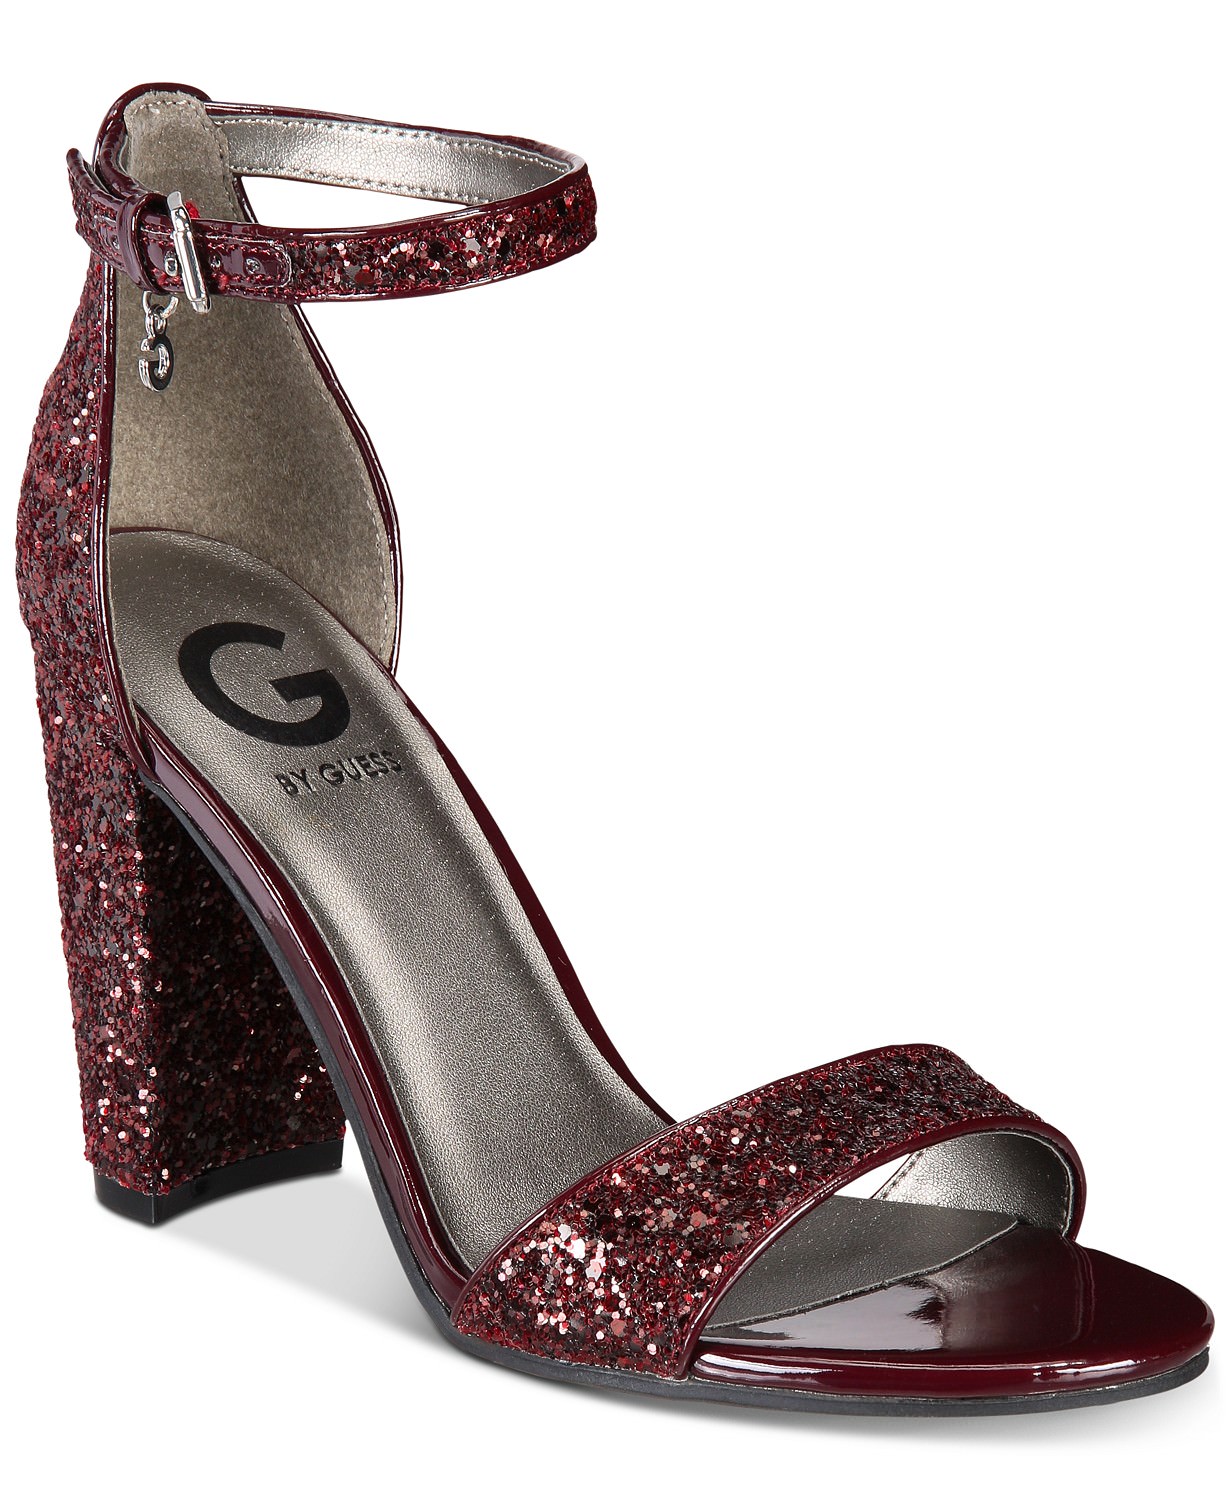 Macy&#39;s Flash Sale: 75% Off Select Women&#39;s Shoes: G by GUESS Sandals - nrd.kbic-nsn.gov